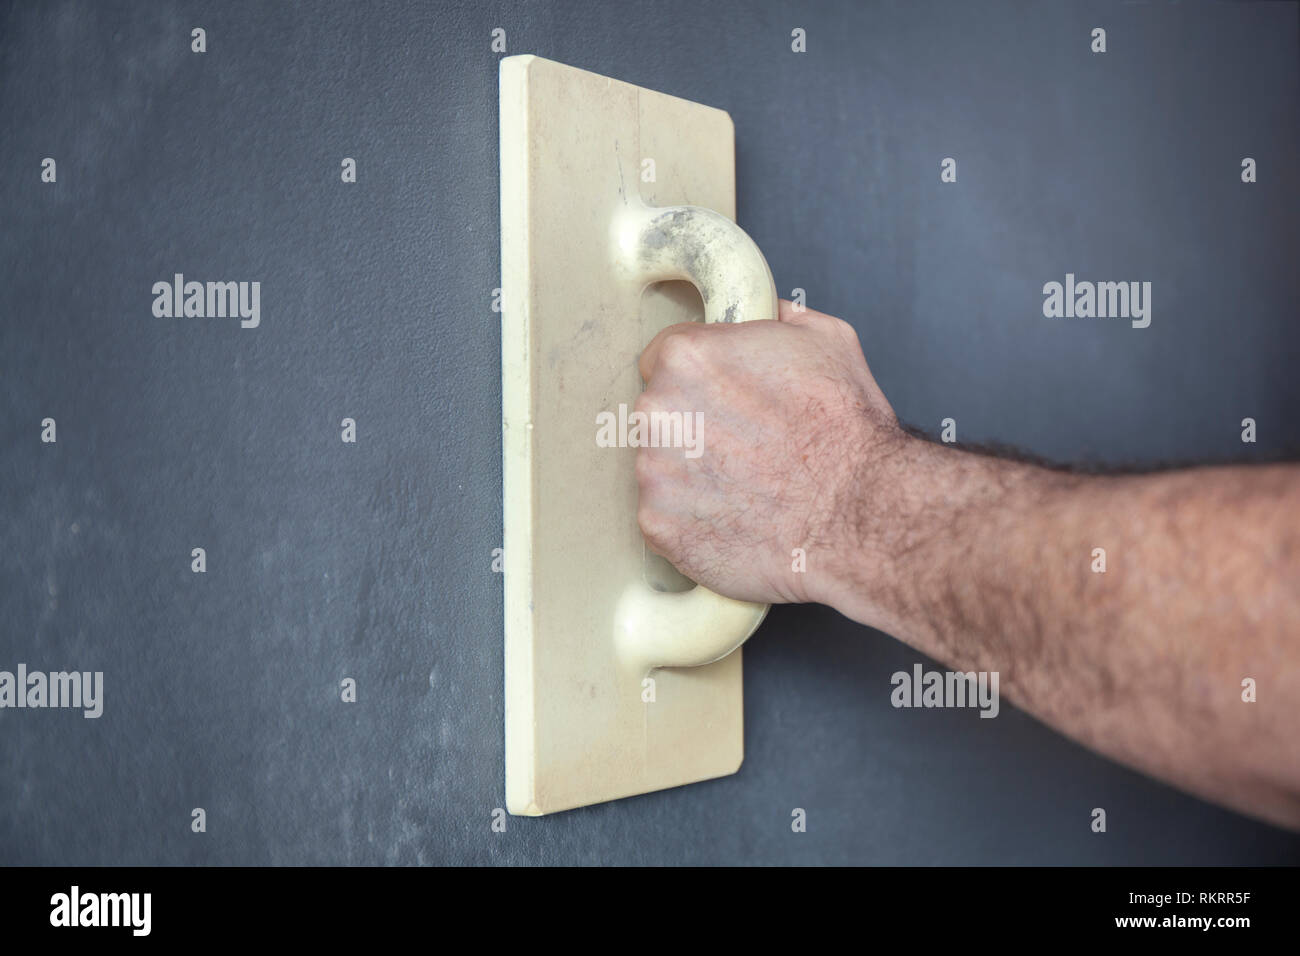 Workers hand with a trowel smoothing a wall with decorative plaster Stock Photo